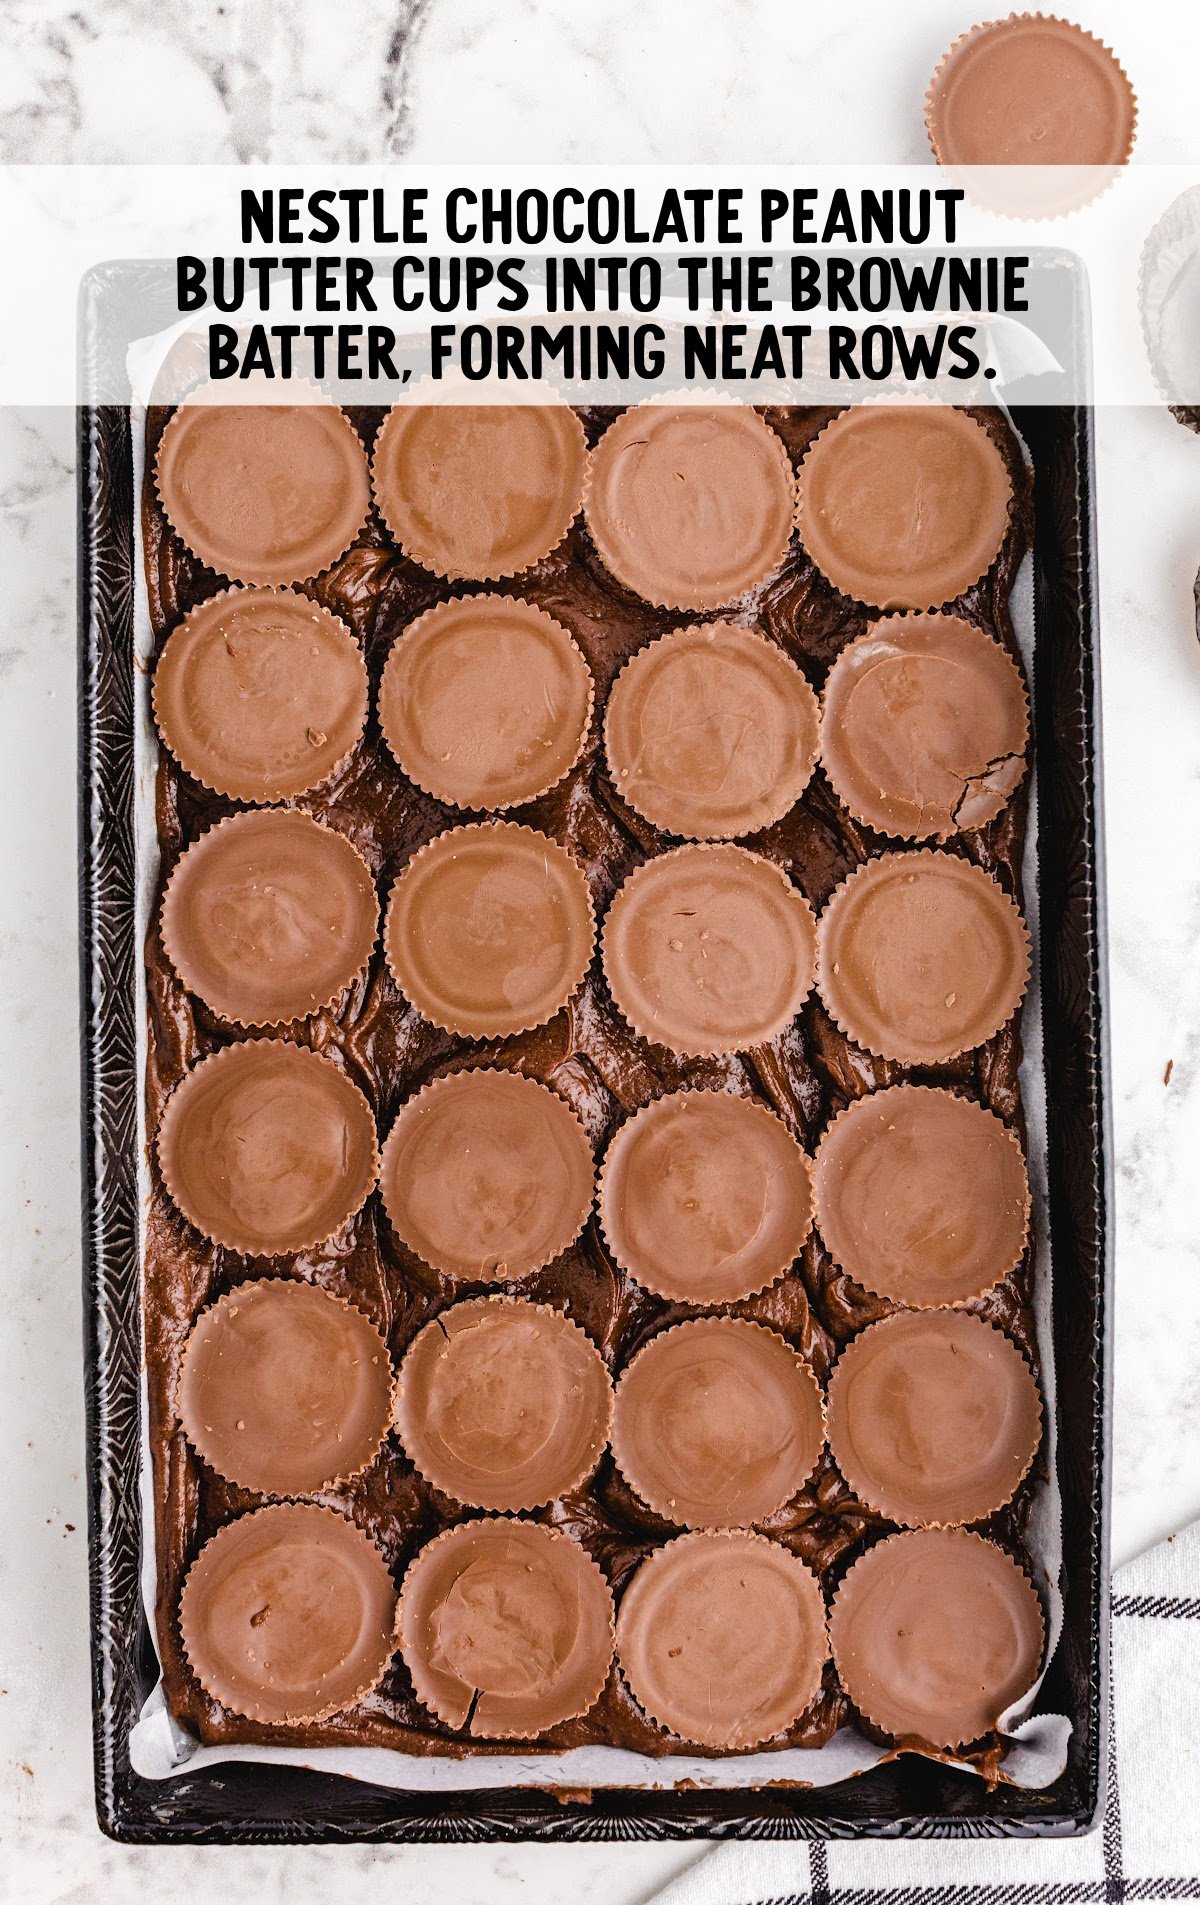 peanut butter cups placed on top of the chocolate batter in the baking pan